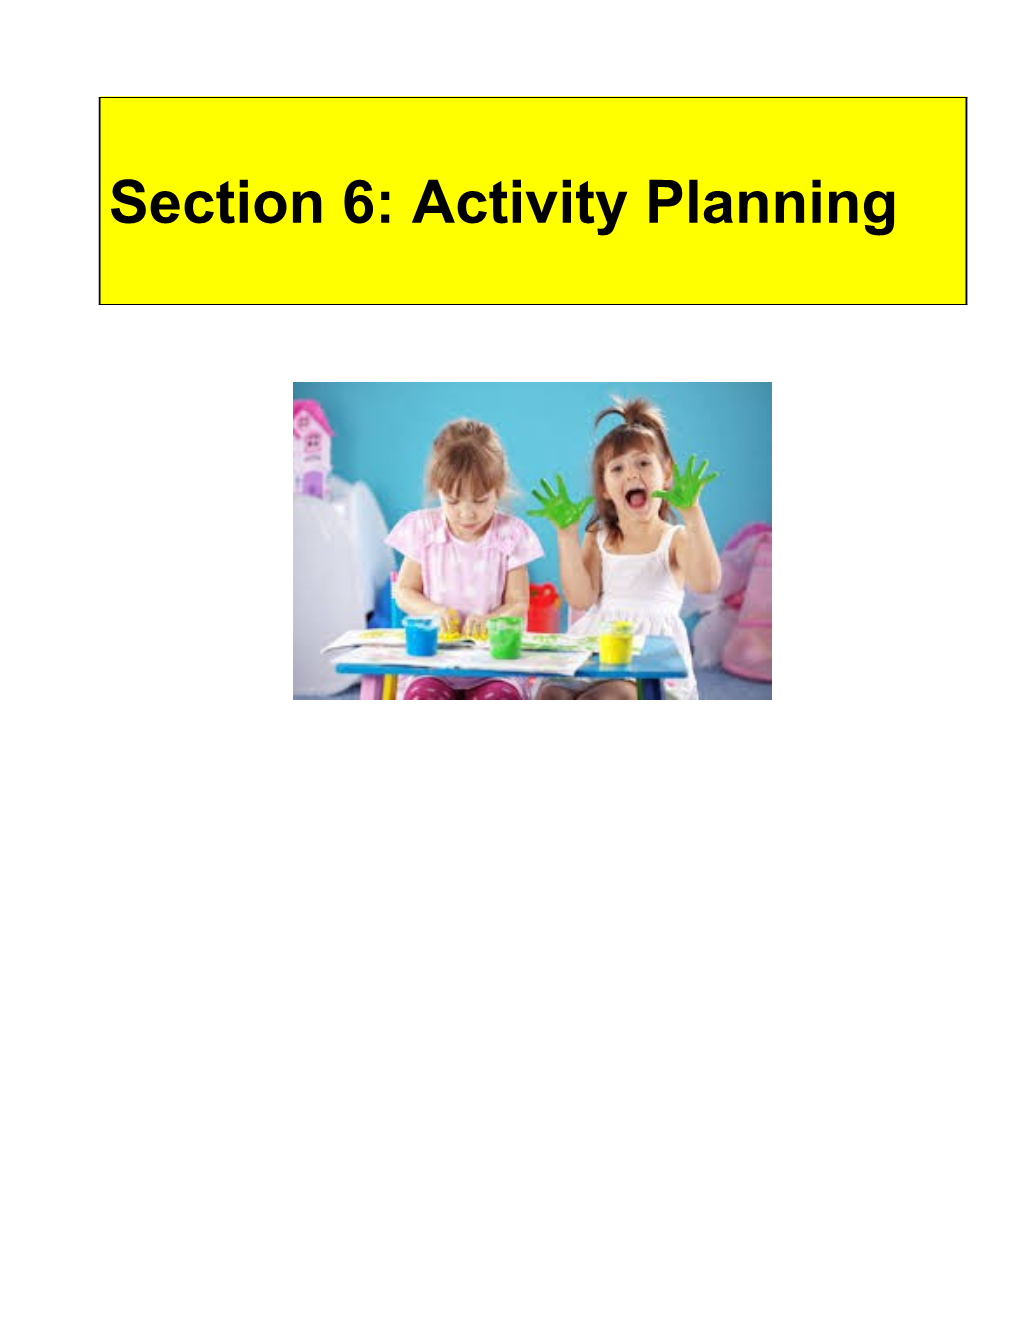 Most Groups Have a Planned Programme of Activities Which Varies from Week to Week. in Order